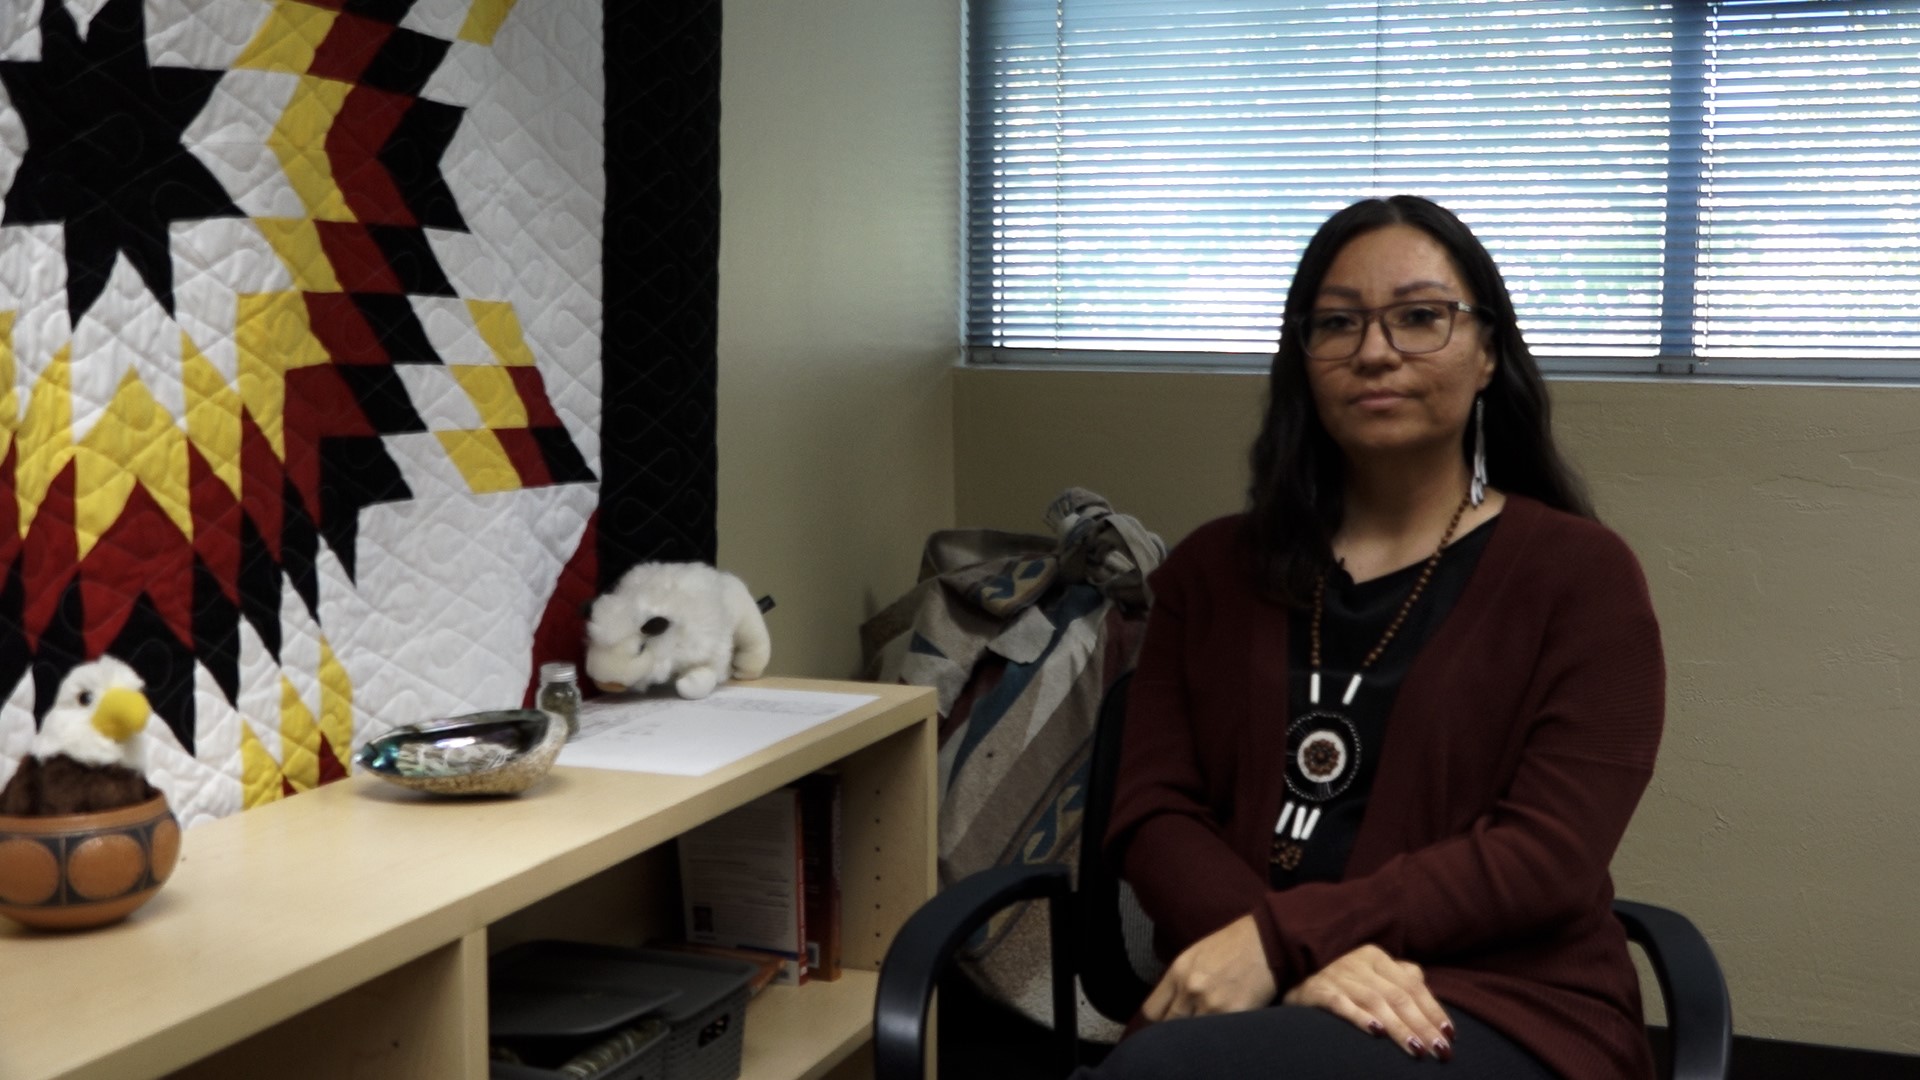 In an interview with ABC10, Native Sisters Circle founder Laetitia Aguilar briefly talked about how history influences Indian country today.